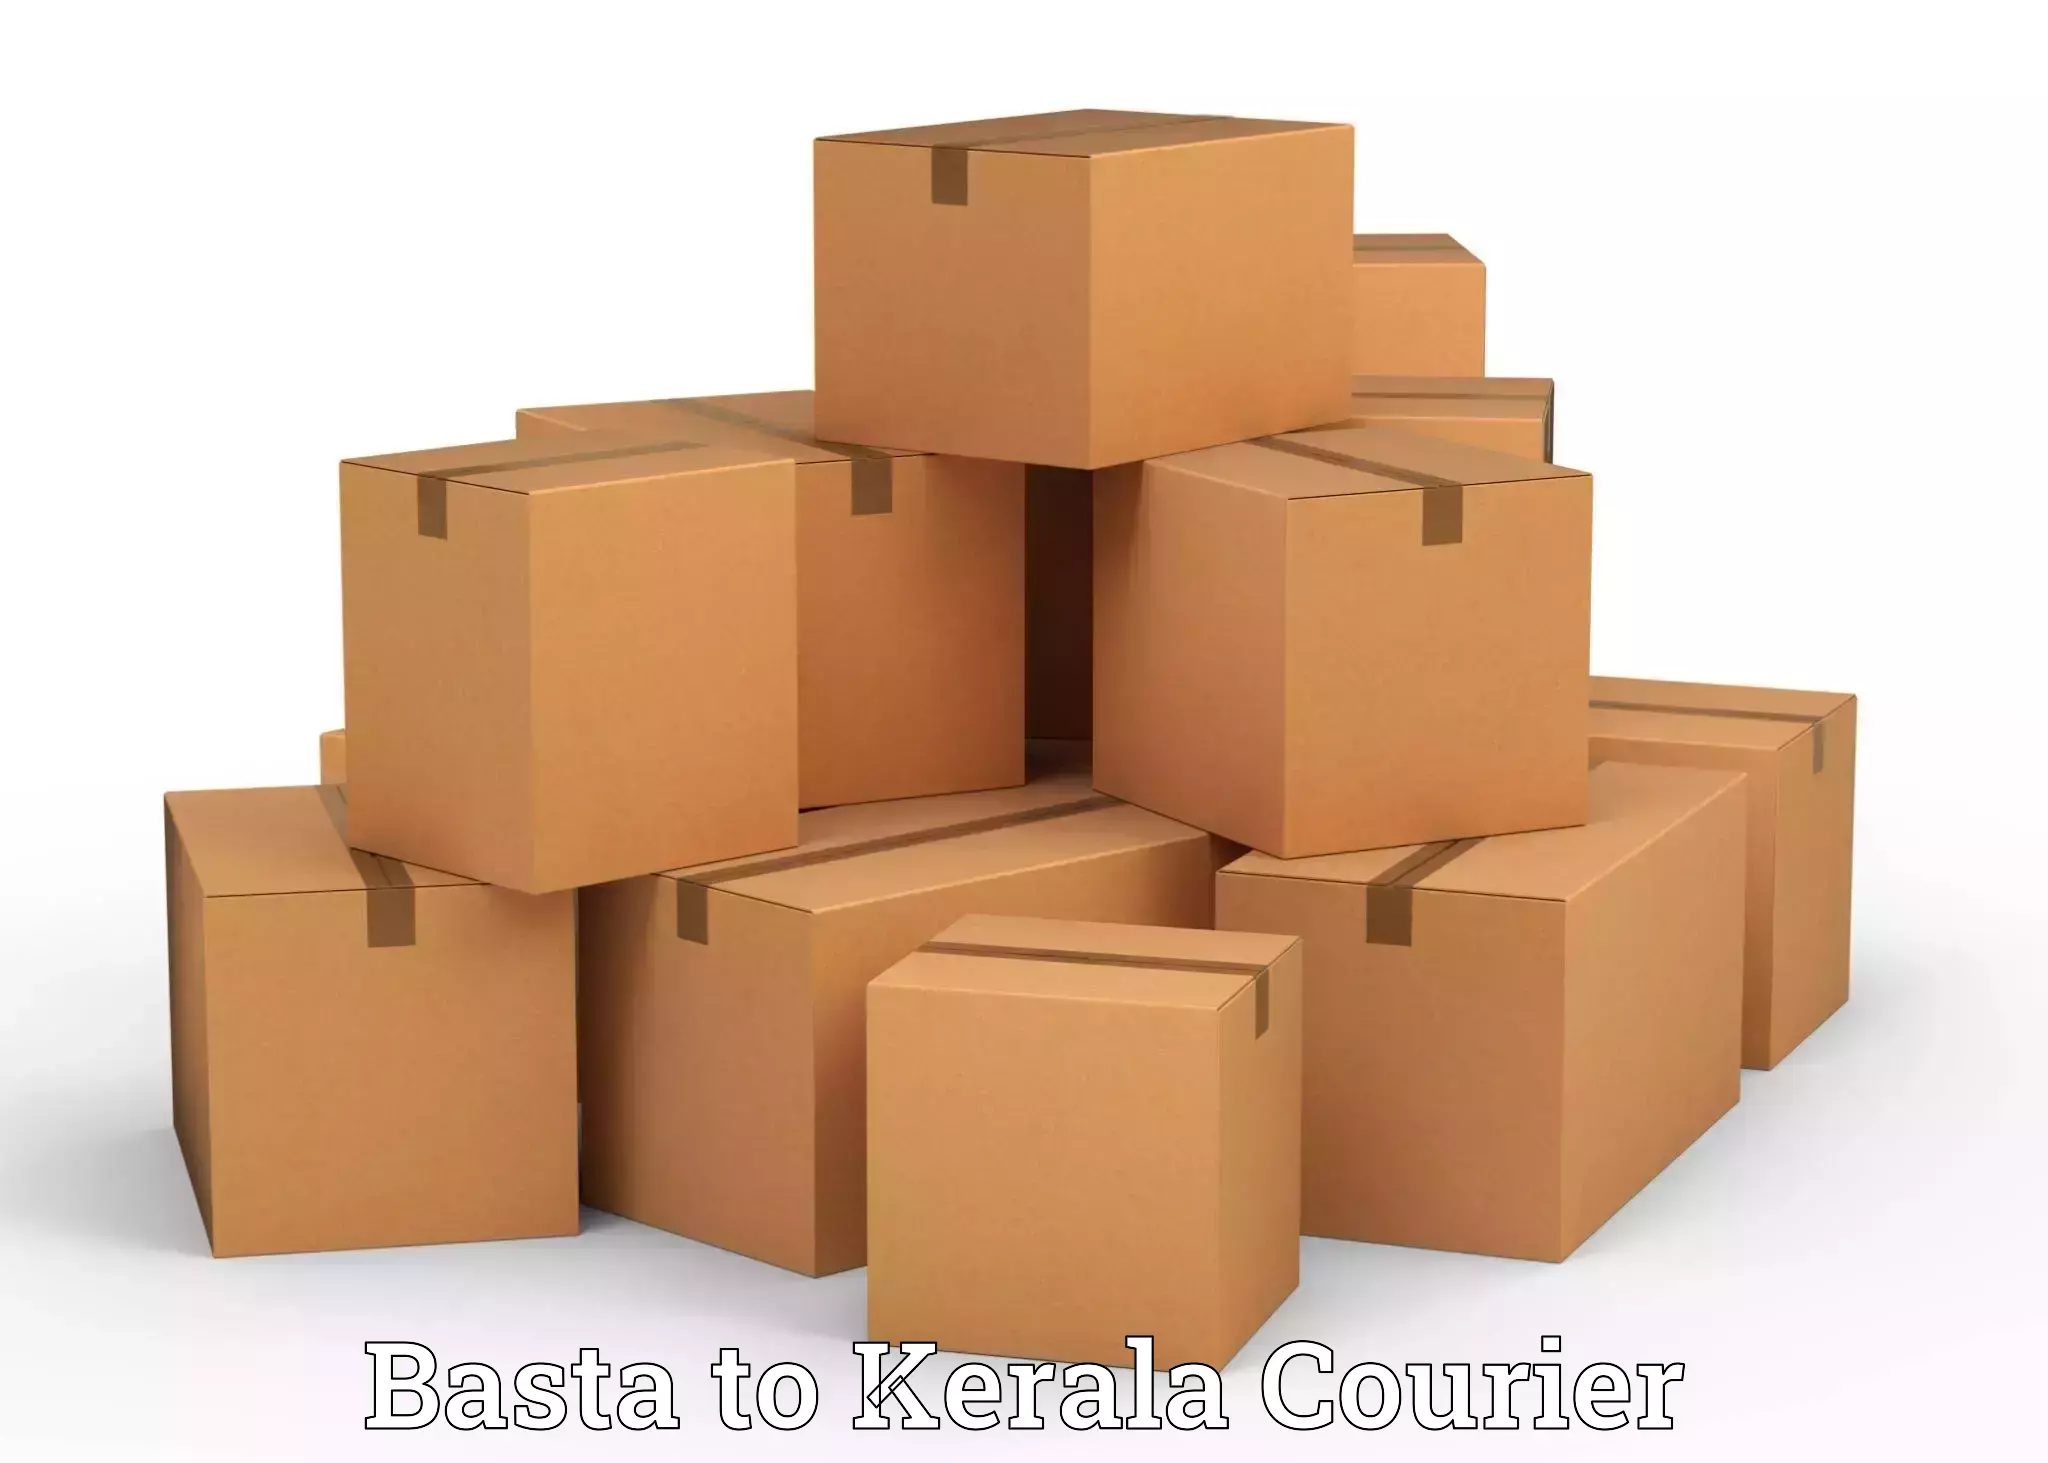 Local moving services in Basta to Kerala